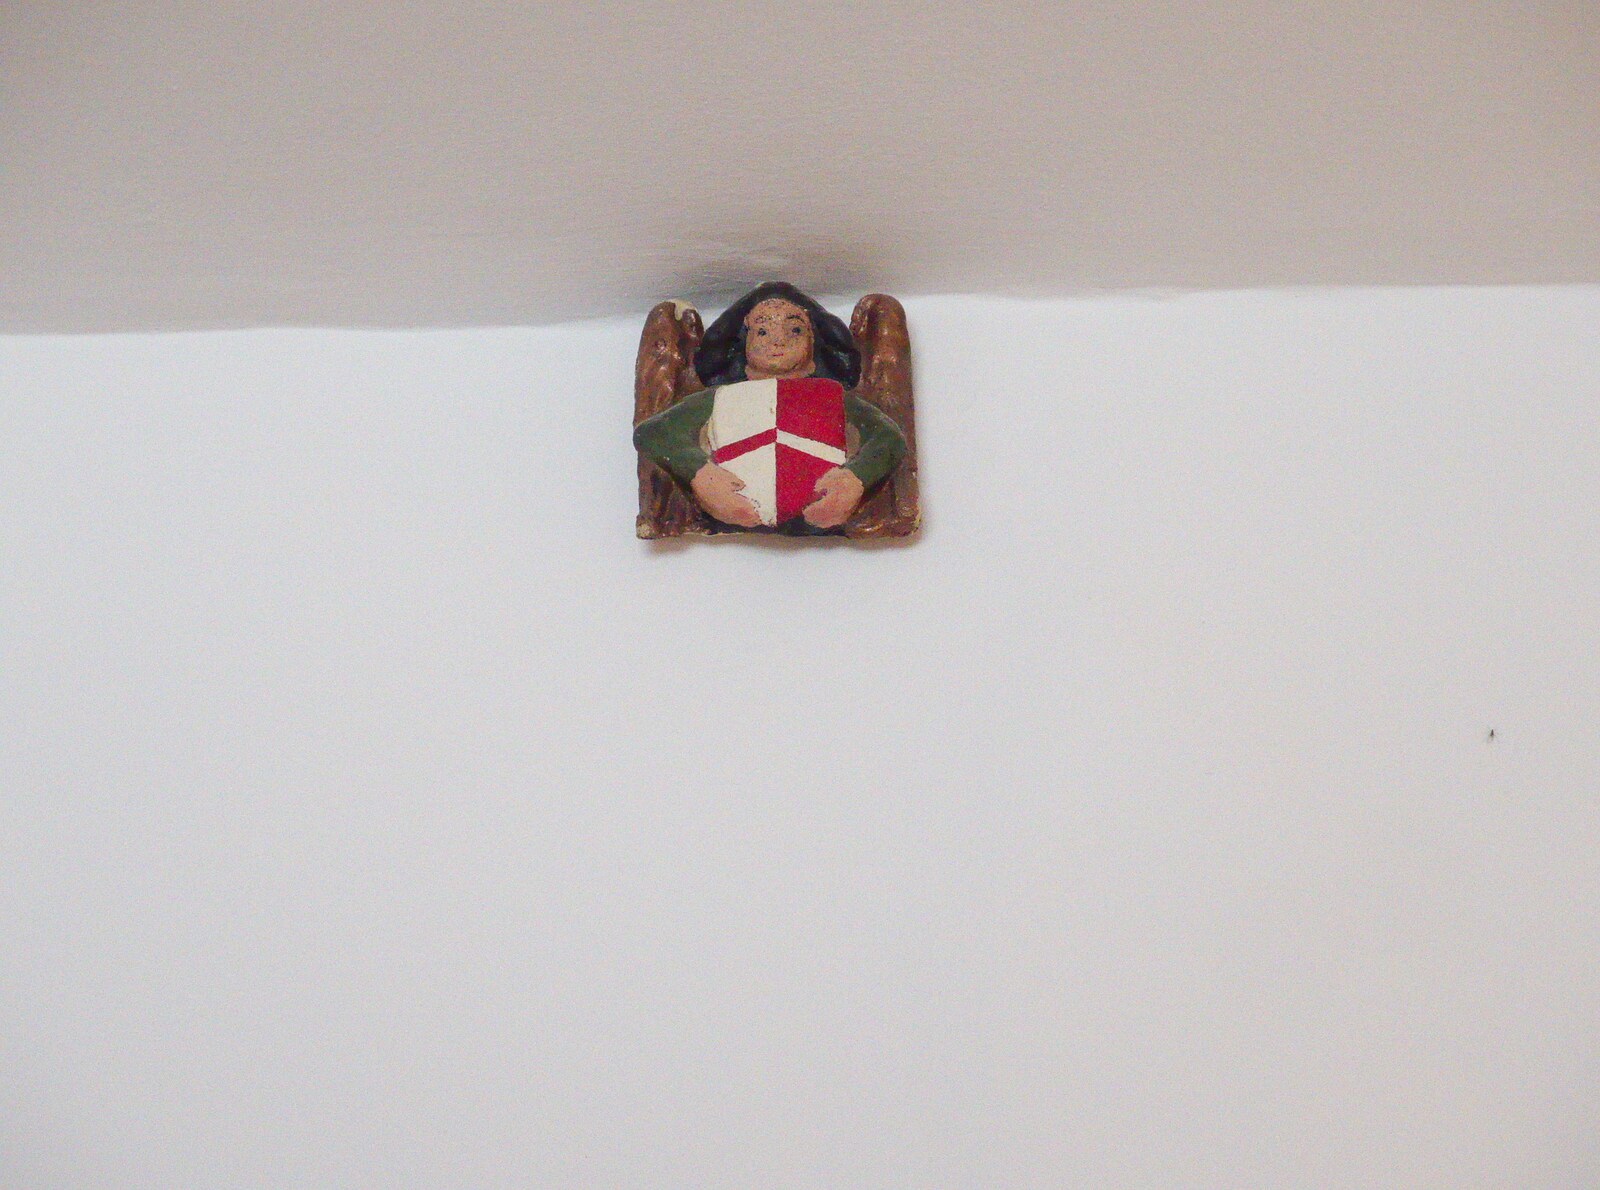 One of many small reliefs on the bar ceiling from Sis and Matt Visit, Suffolk and Norfolk - 31st May 2014